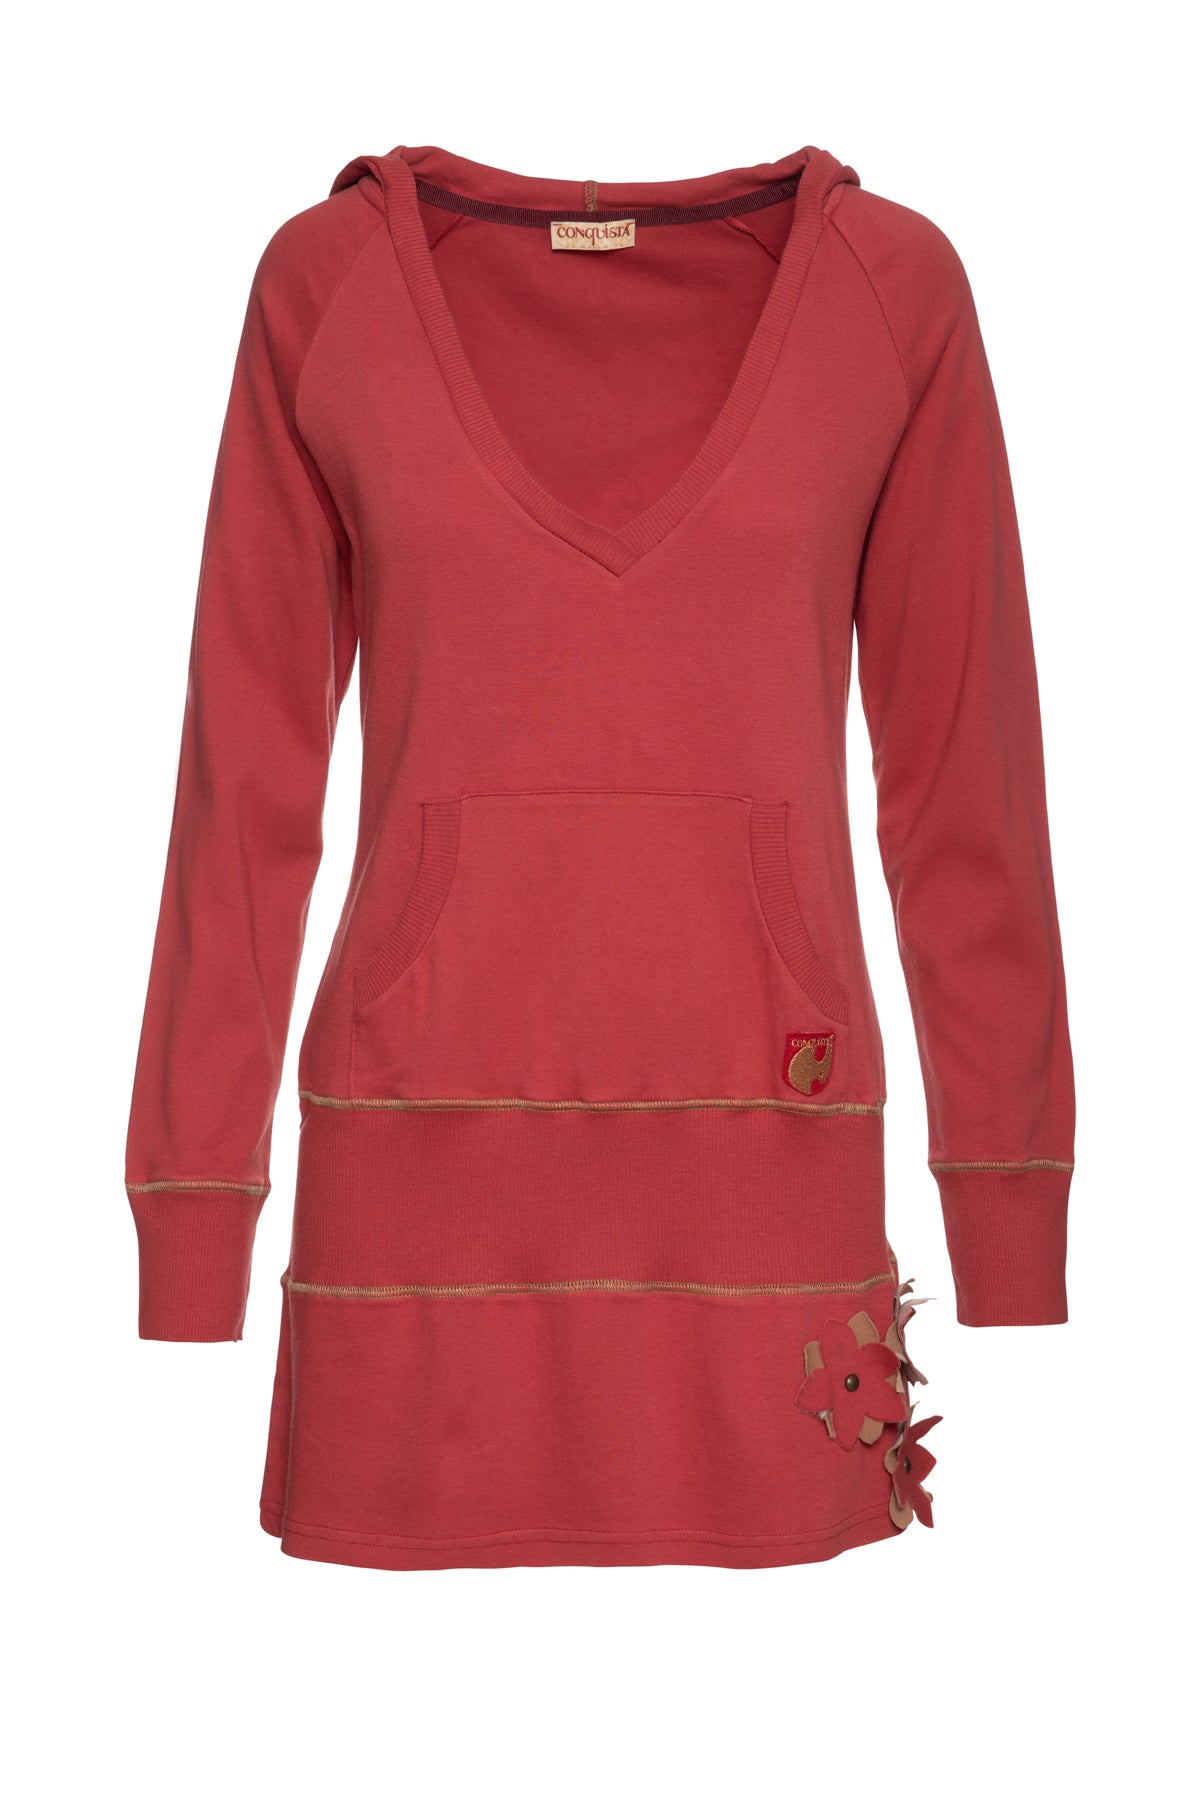 Women’s Hooded Dark Red Tunic With Appliqu Detail Conquista